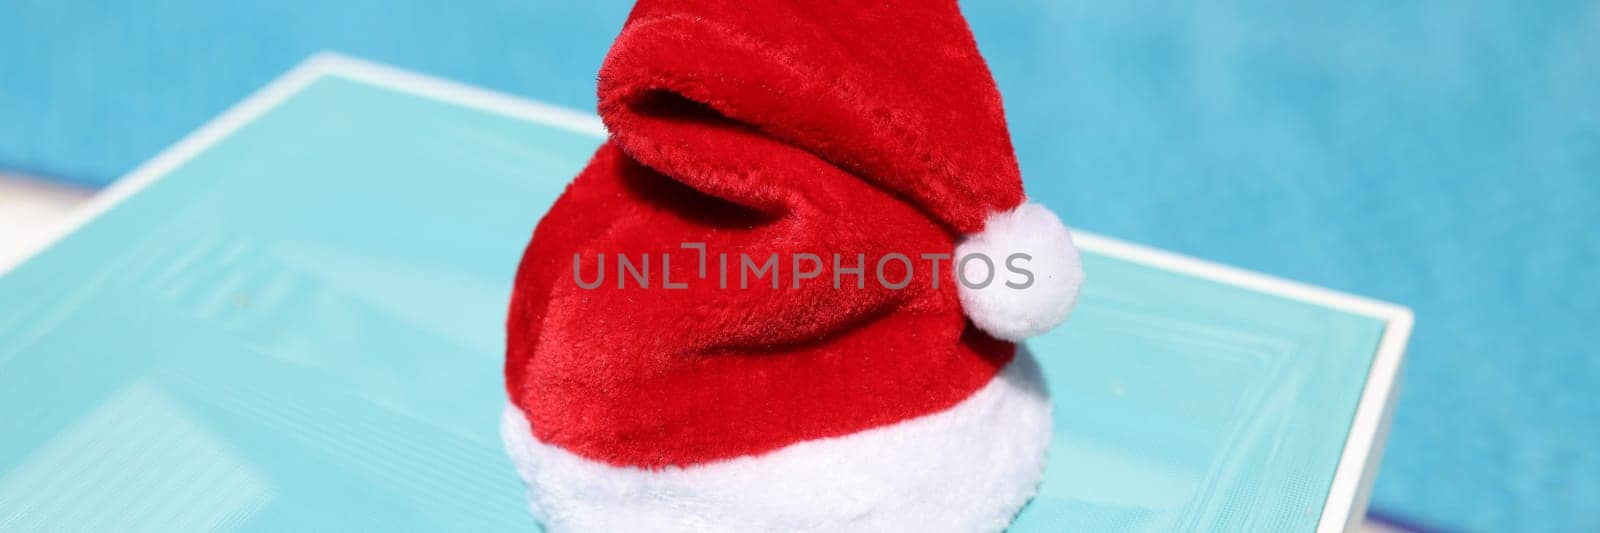 Santa claus red hat standing on beach lounger closeup. Travel to warm countries on new year holidays concept